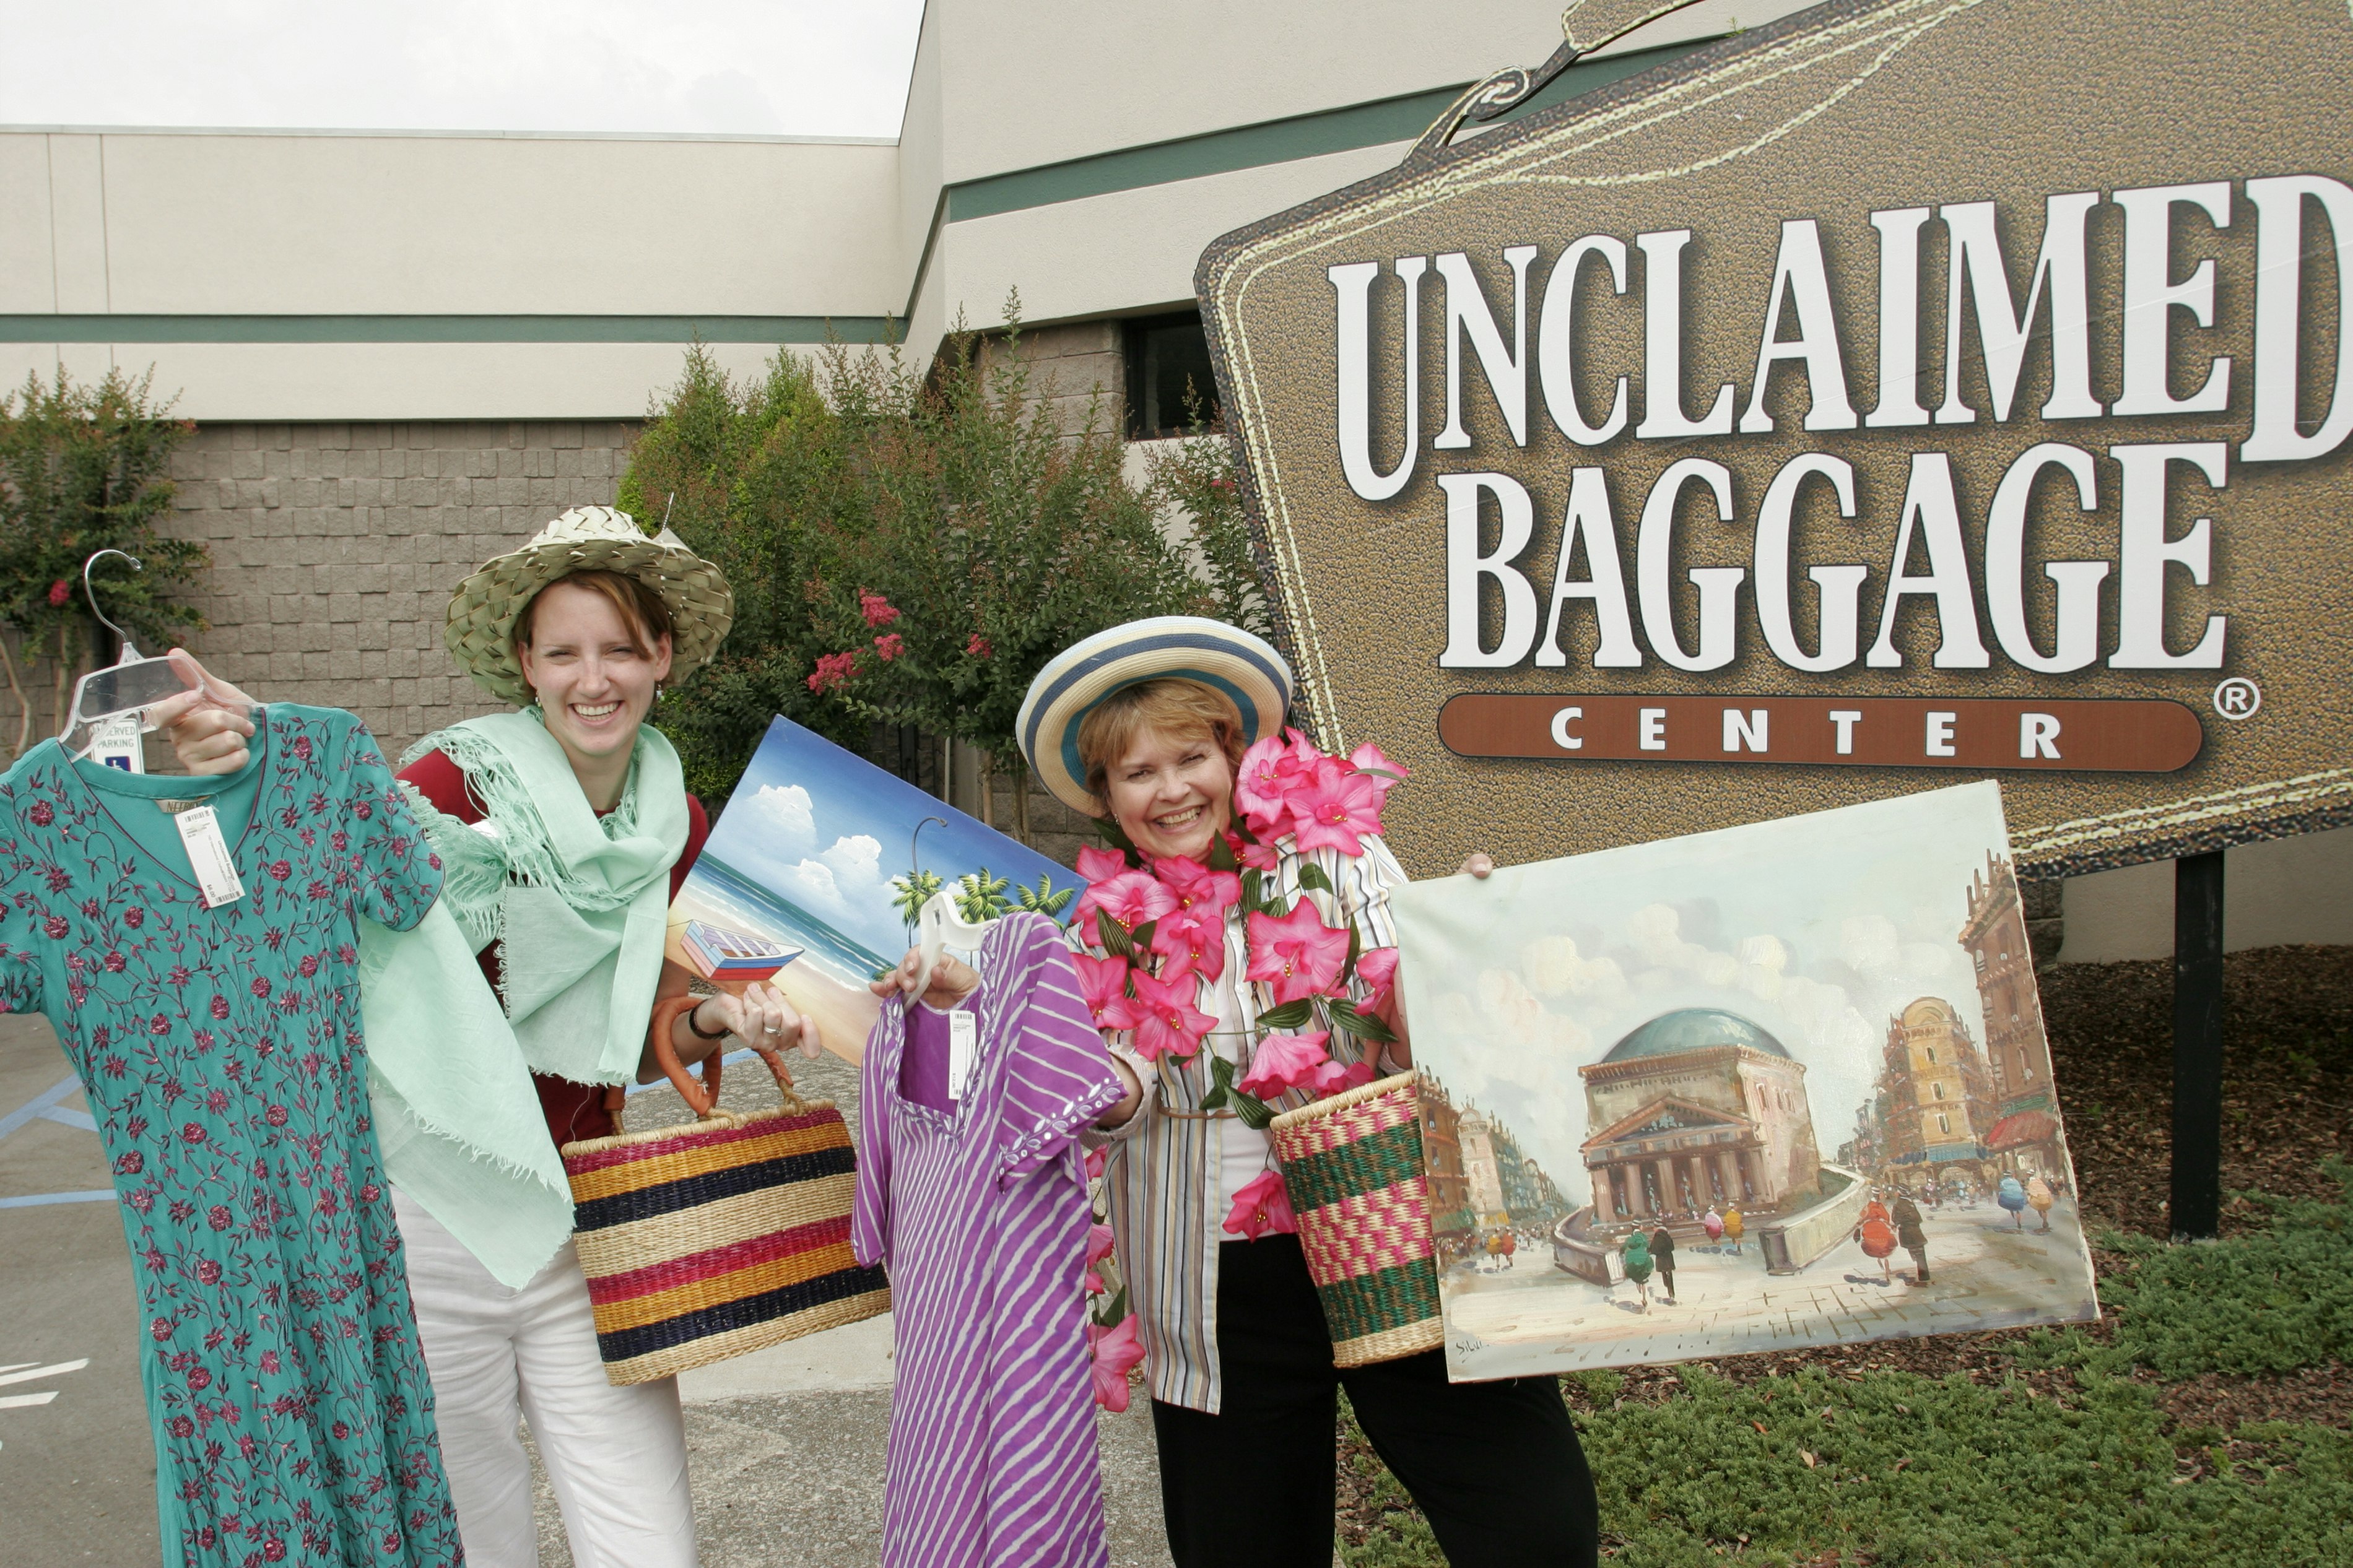 Two women stand by the Unclaimed Baggage Center sign which is brown and suitcase shaped. The woman on the left holds a green print dress on a hangar, a striped wicker bag, and a painting of the beach. On her head is a hat and around her neck is a mint green scarf. The woman on the right also wears a straw hat, and is holding a pink striped dress, a wicker bag, and a painting of a cityscape.